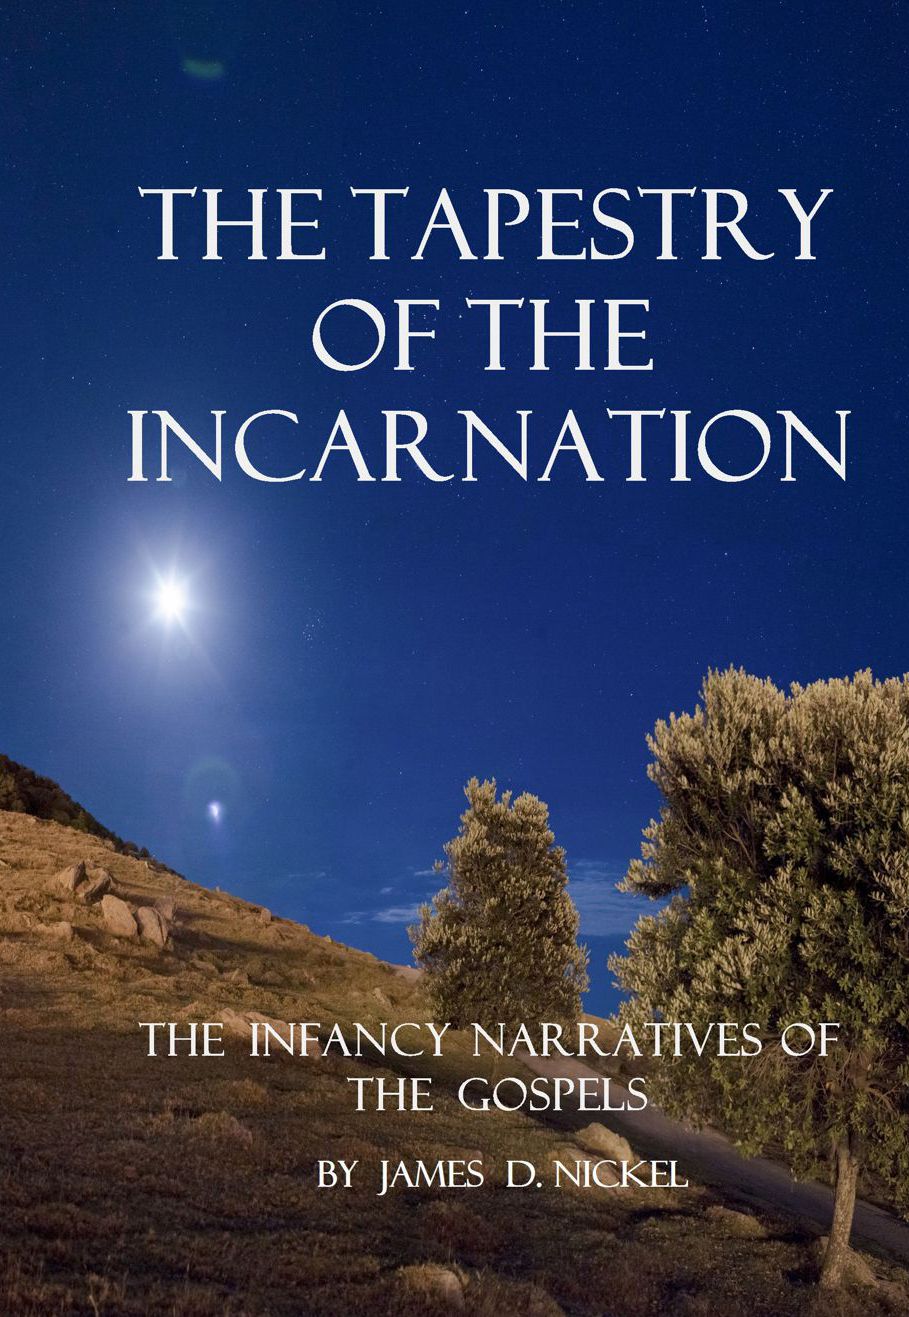 The Taptestry of the Incarnation